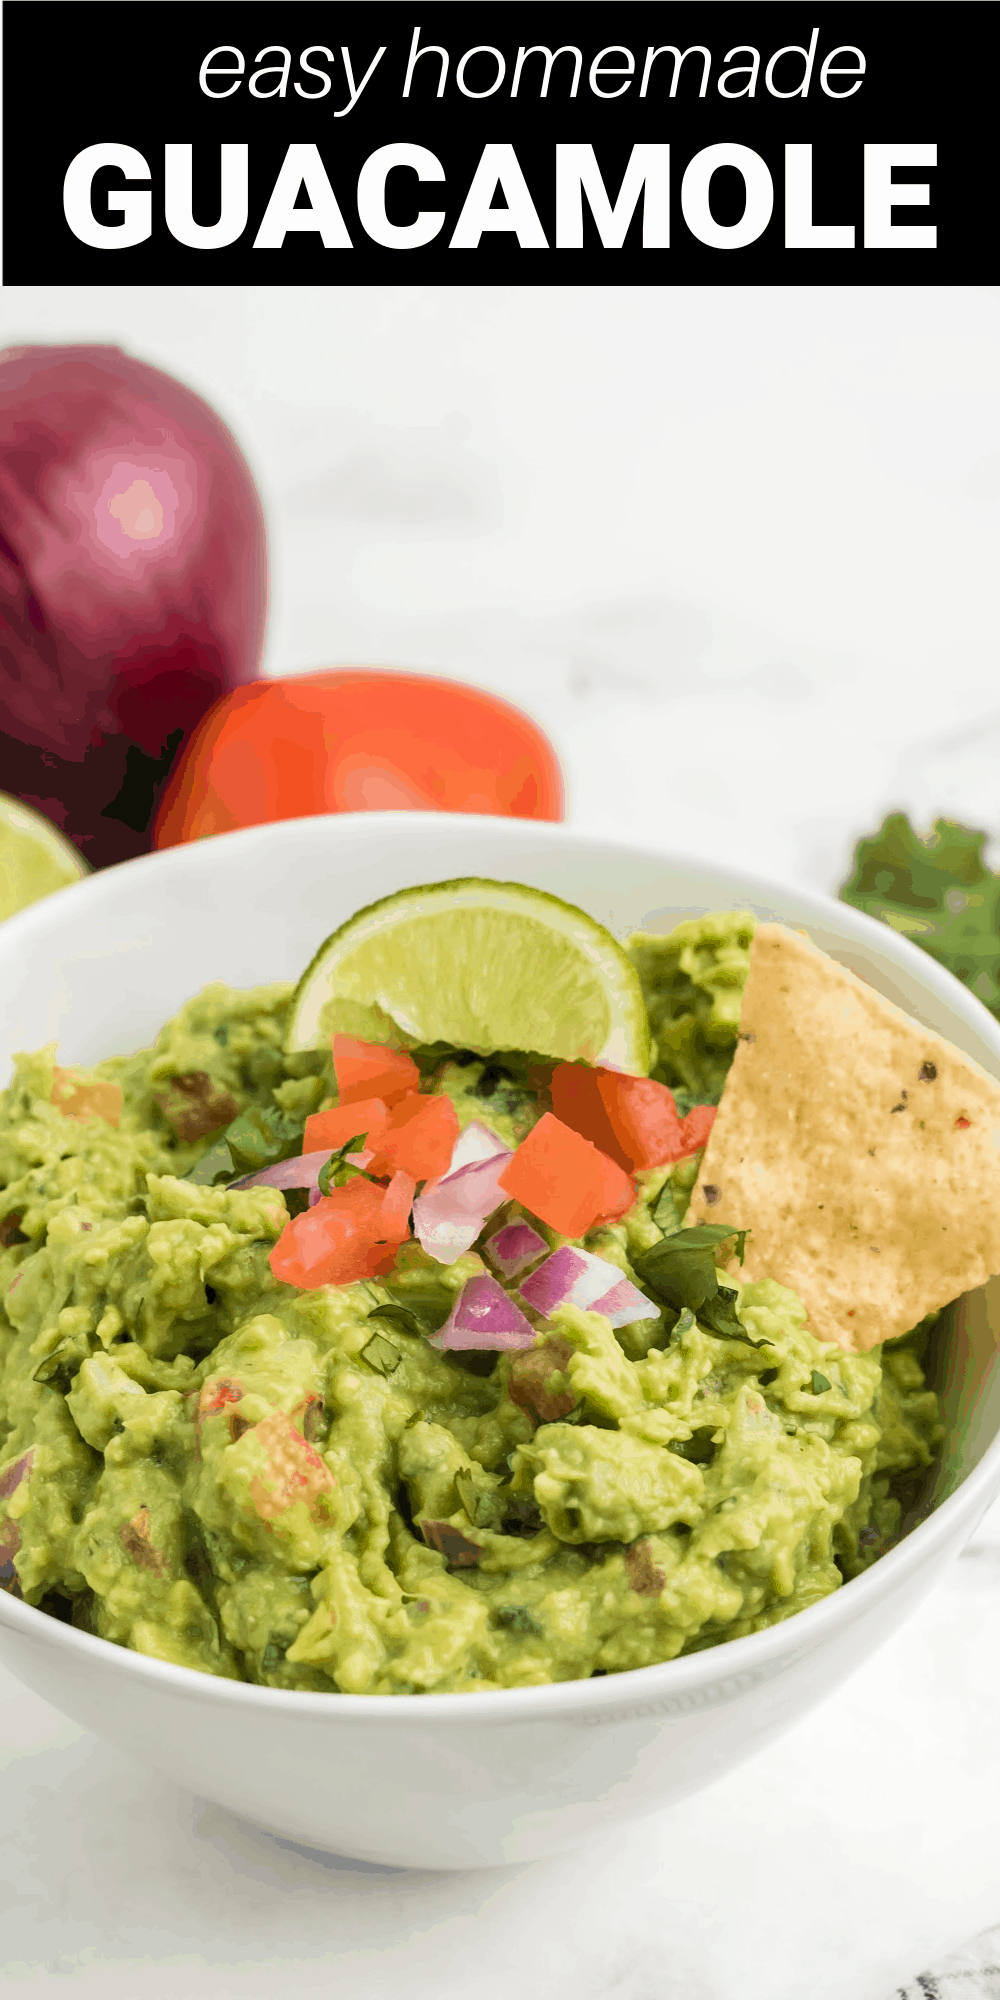 This easy guacamole recipe uses fresh ingredients to make the perfect appetizer or taco topping. All you need are simple ingredients: ripe avocados, red onion, tomatoes, cilantro, garlic, lime juice, and salt and pepper. Add a little hot sauce to kick it up a notch!